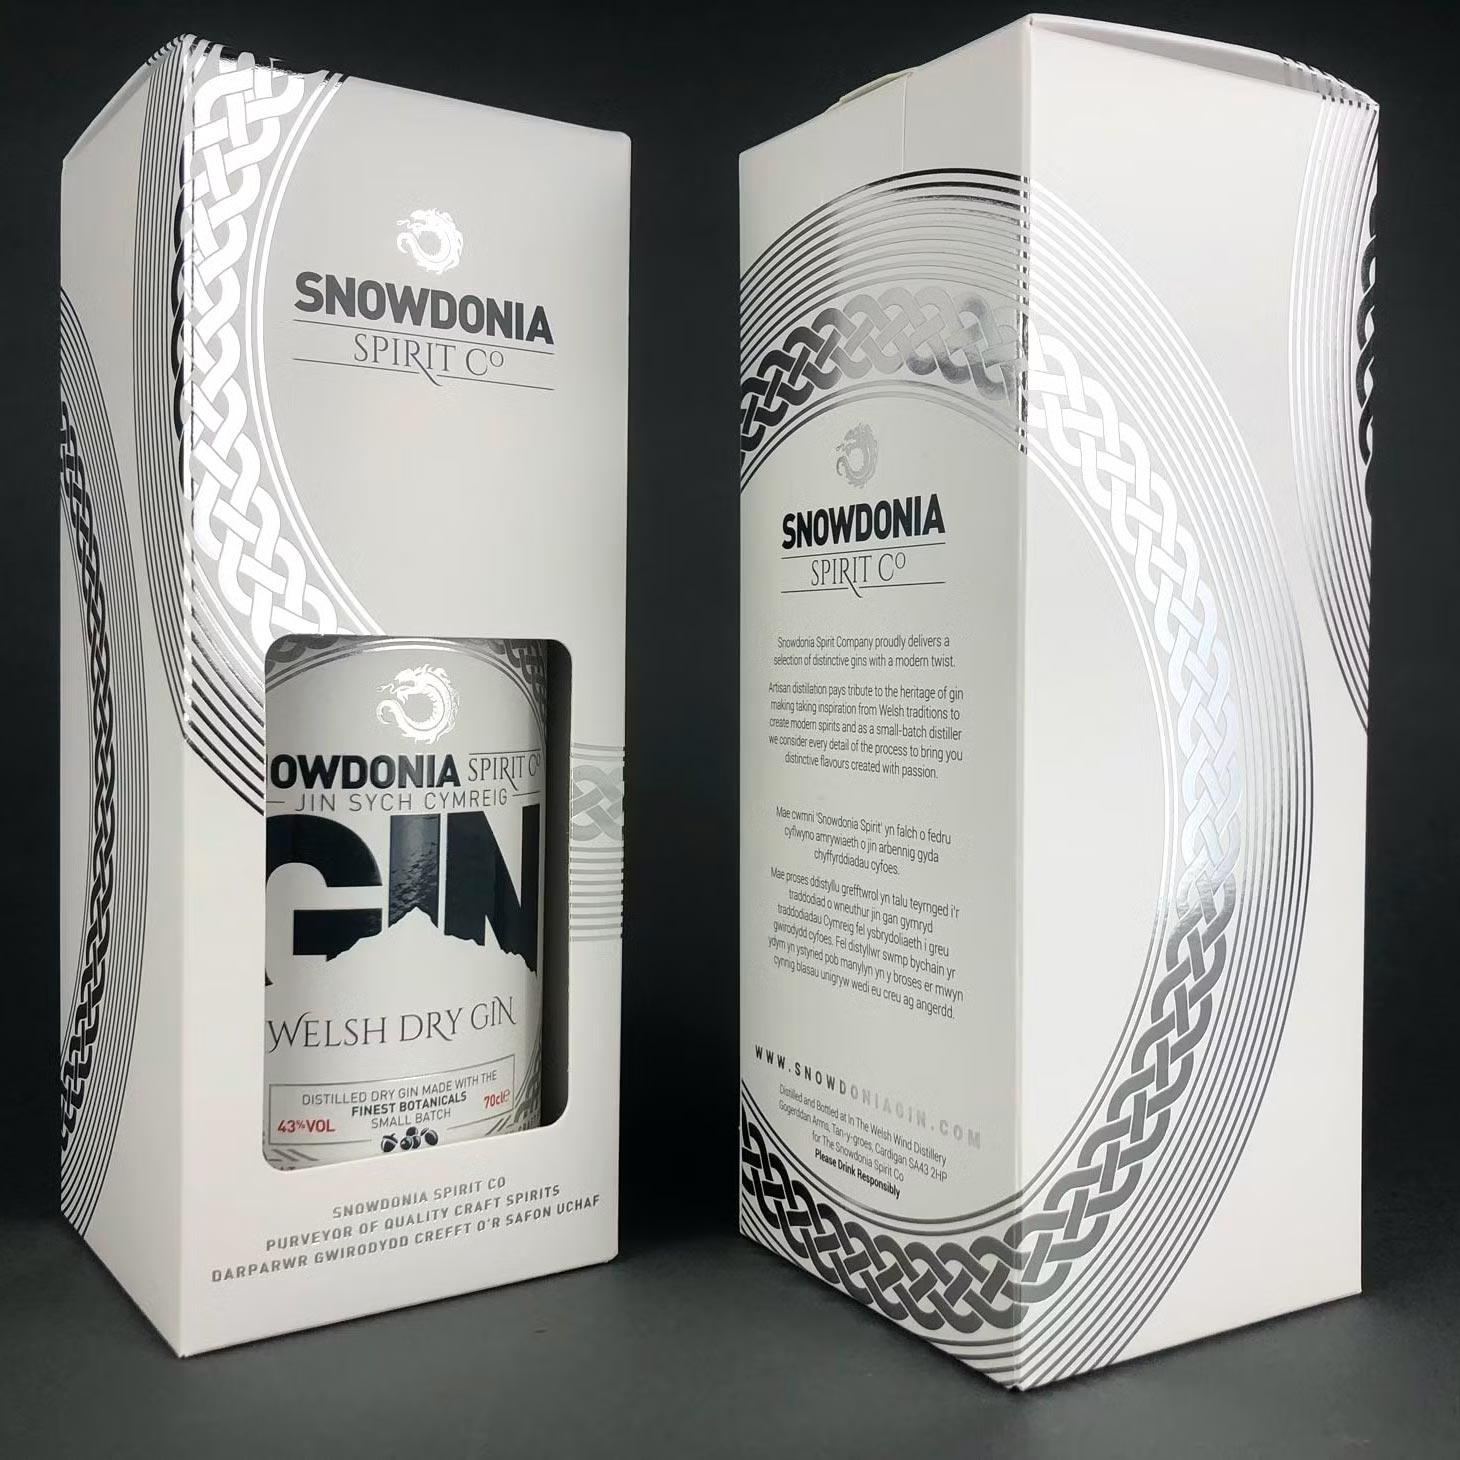 Welsh Dry Gin - Snowdonia Spirit Co - 70cl 43% VOL (UK postage included in price)